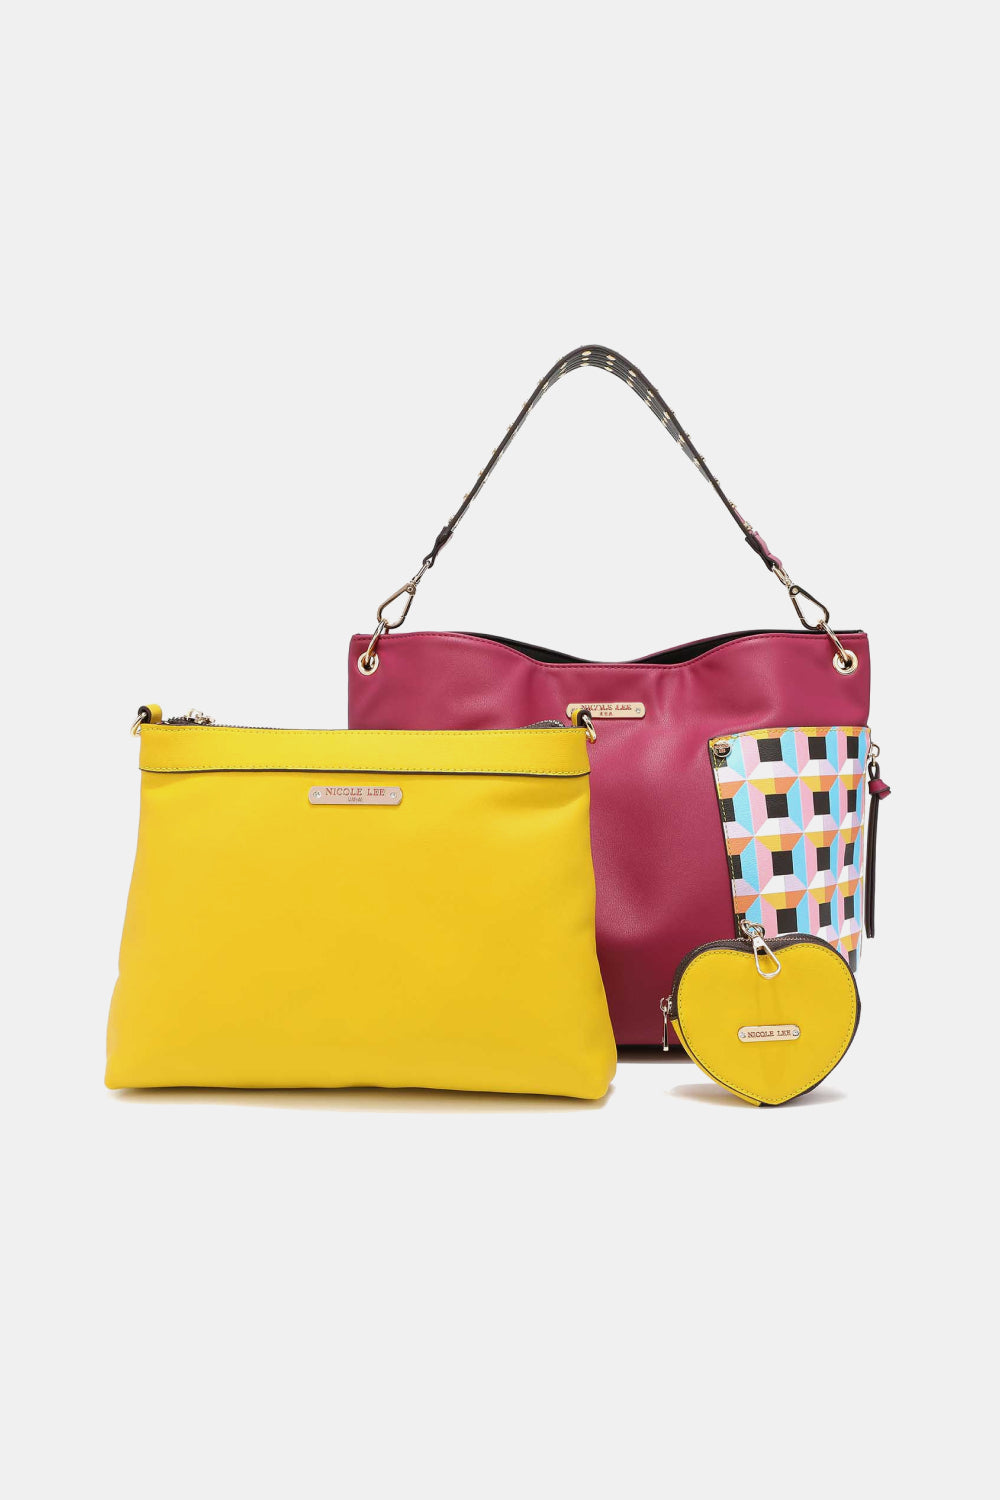 Get trendy with Nicole Lee USA Quihn 3-Piece Handbag Set - Bags available at Styles Code. Grab yours today!